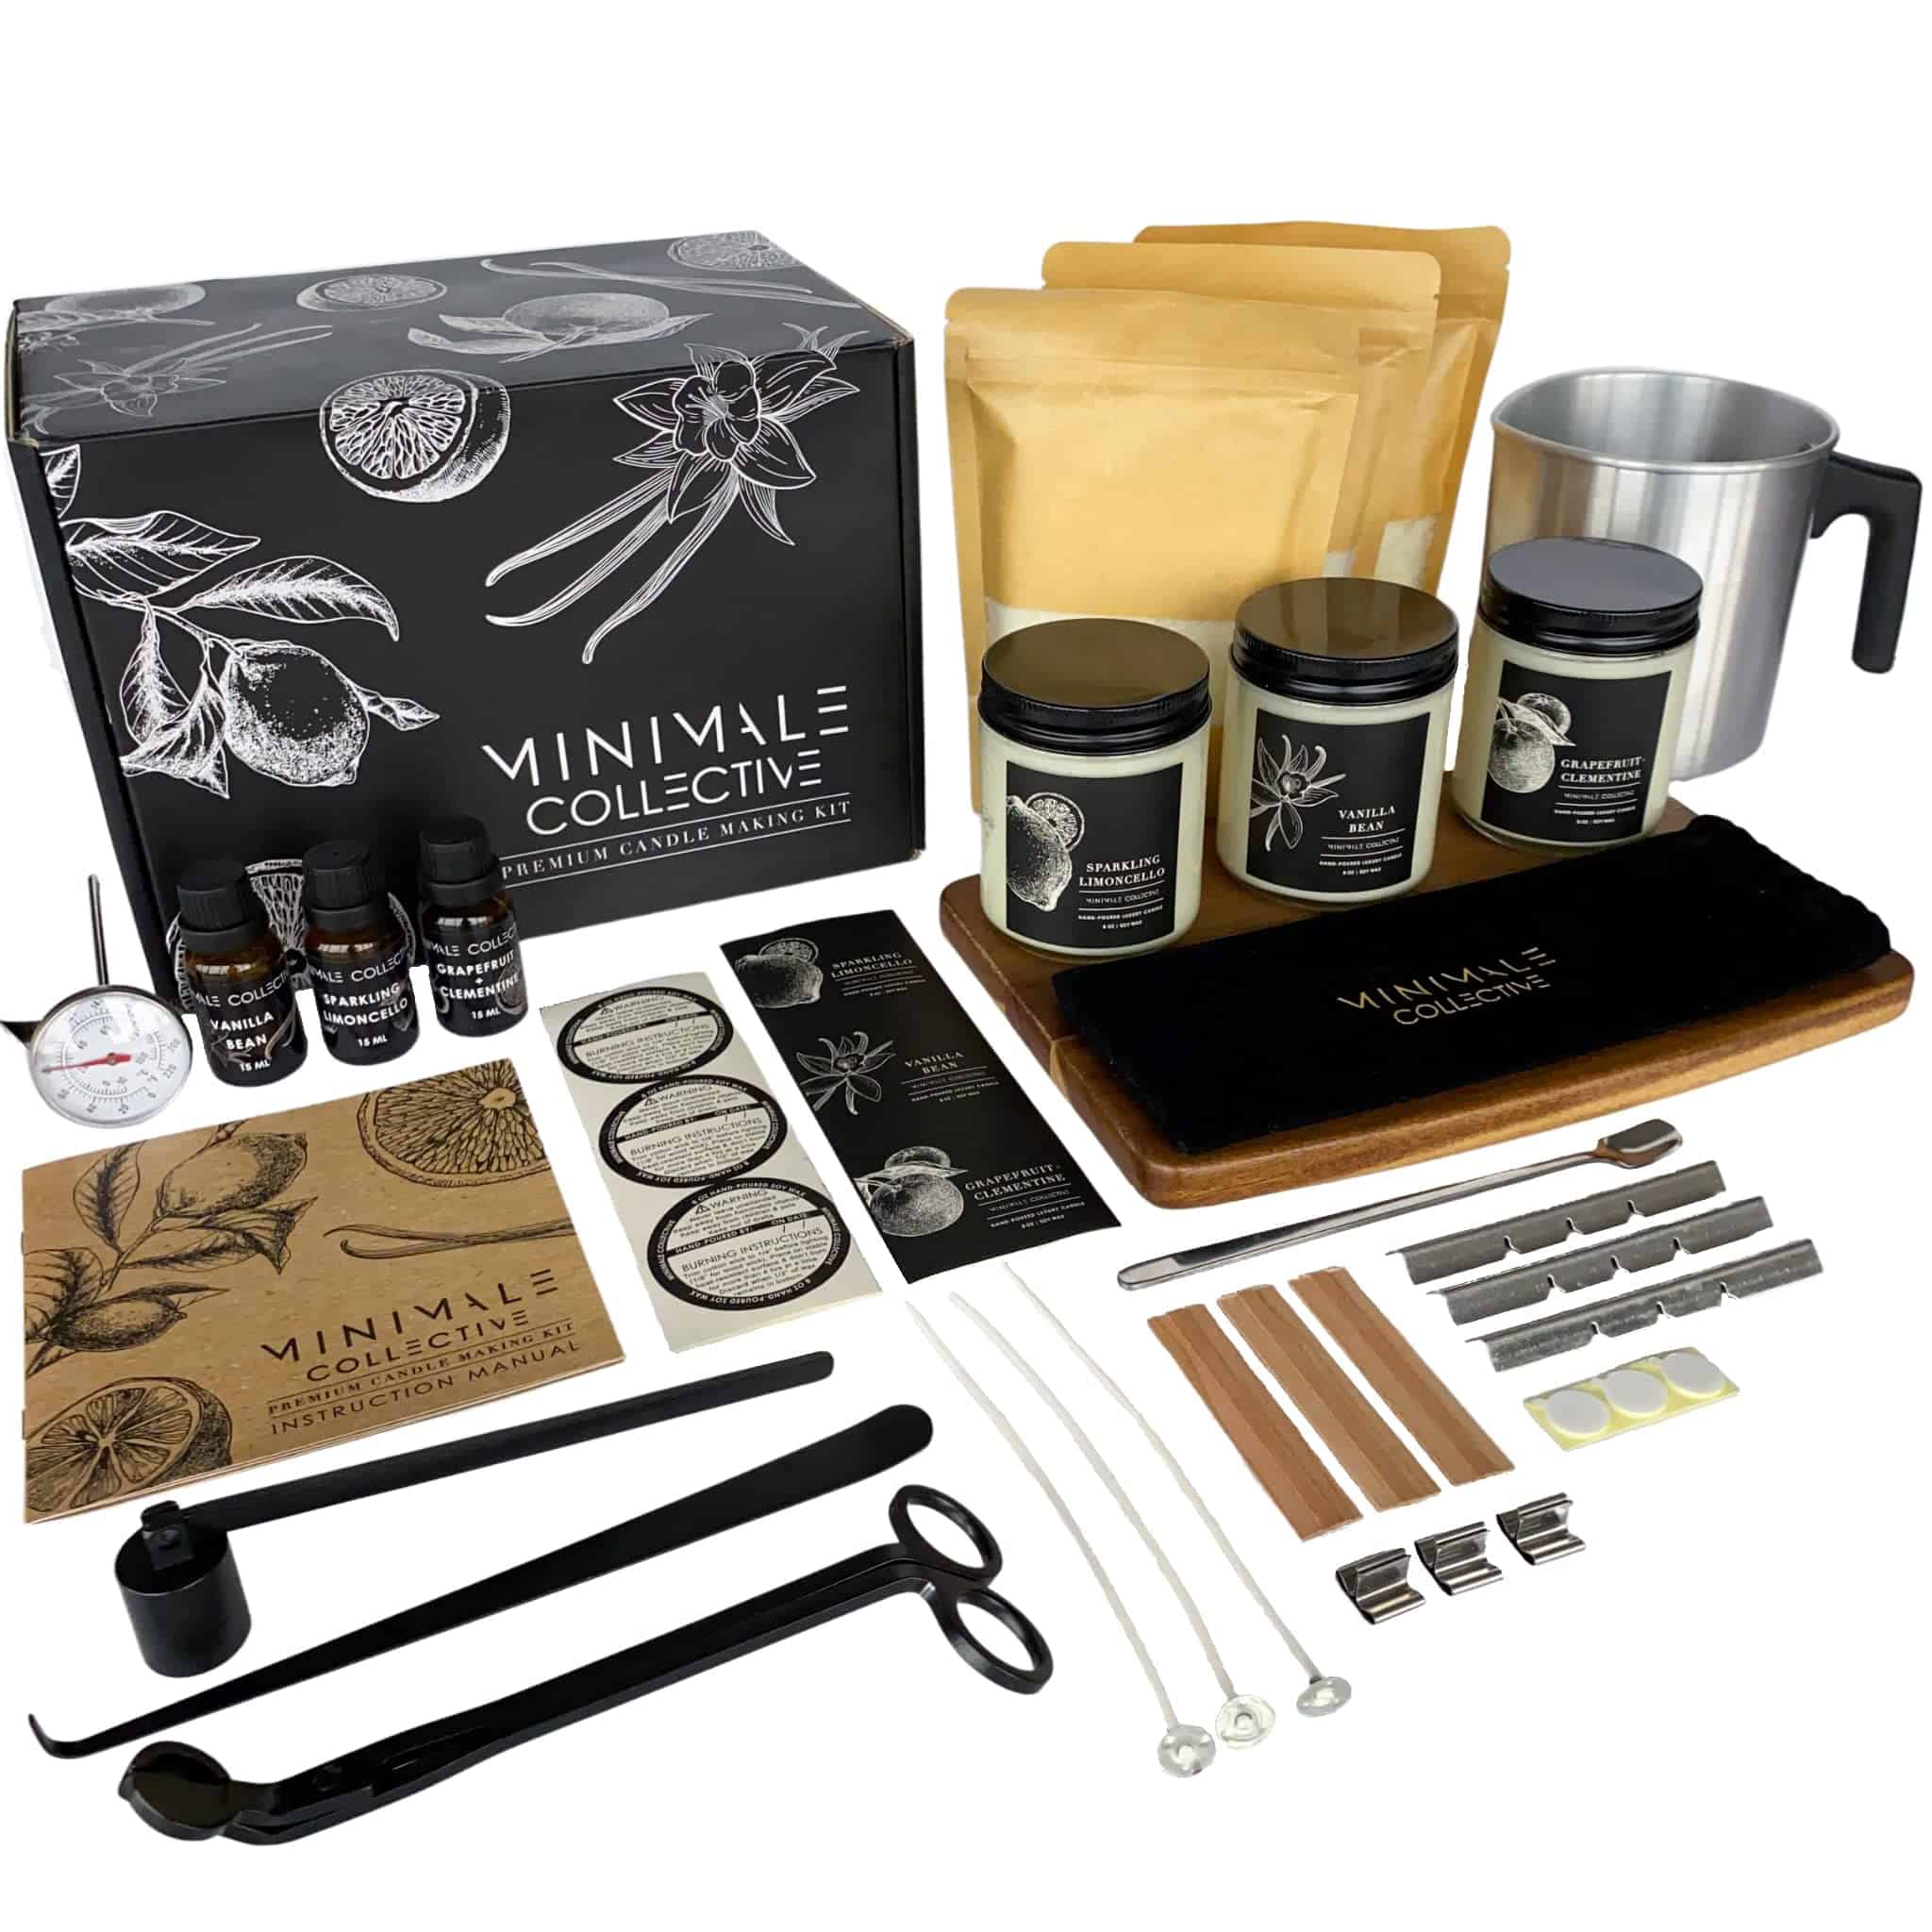 Minimale Collective Luxury Candle Making Kit